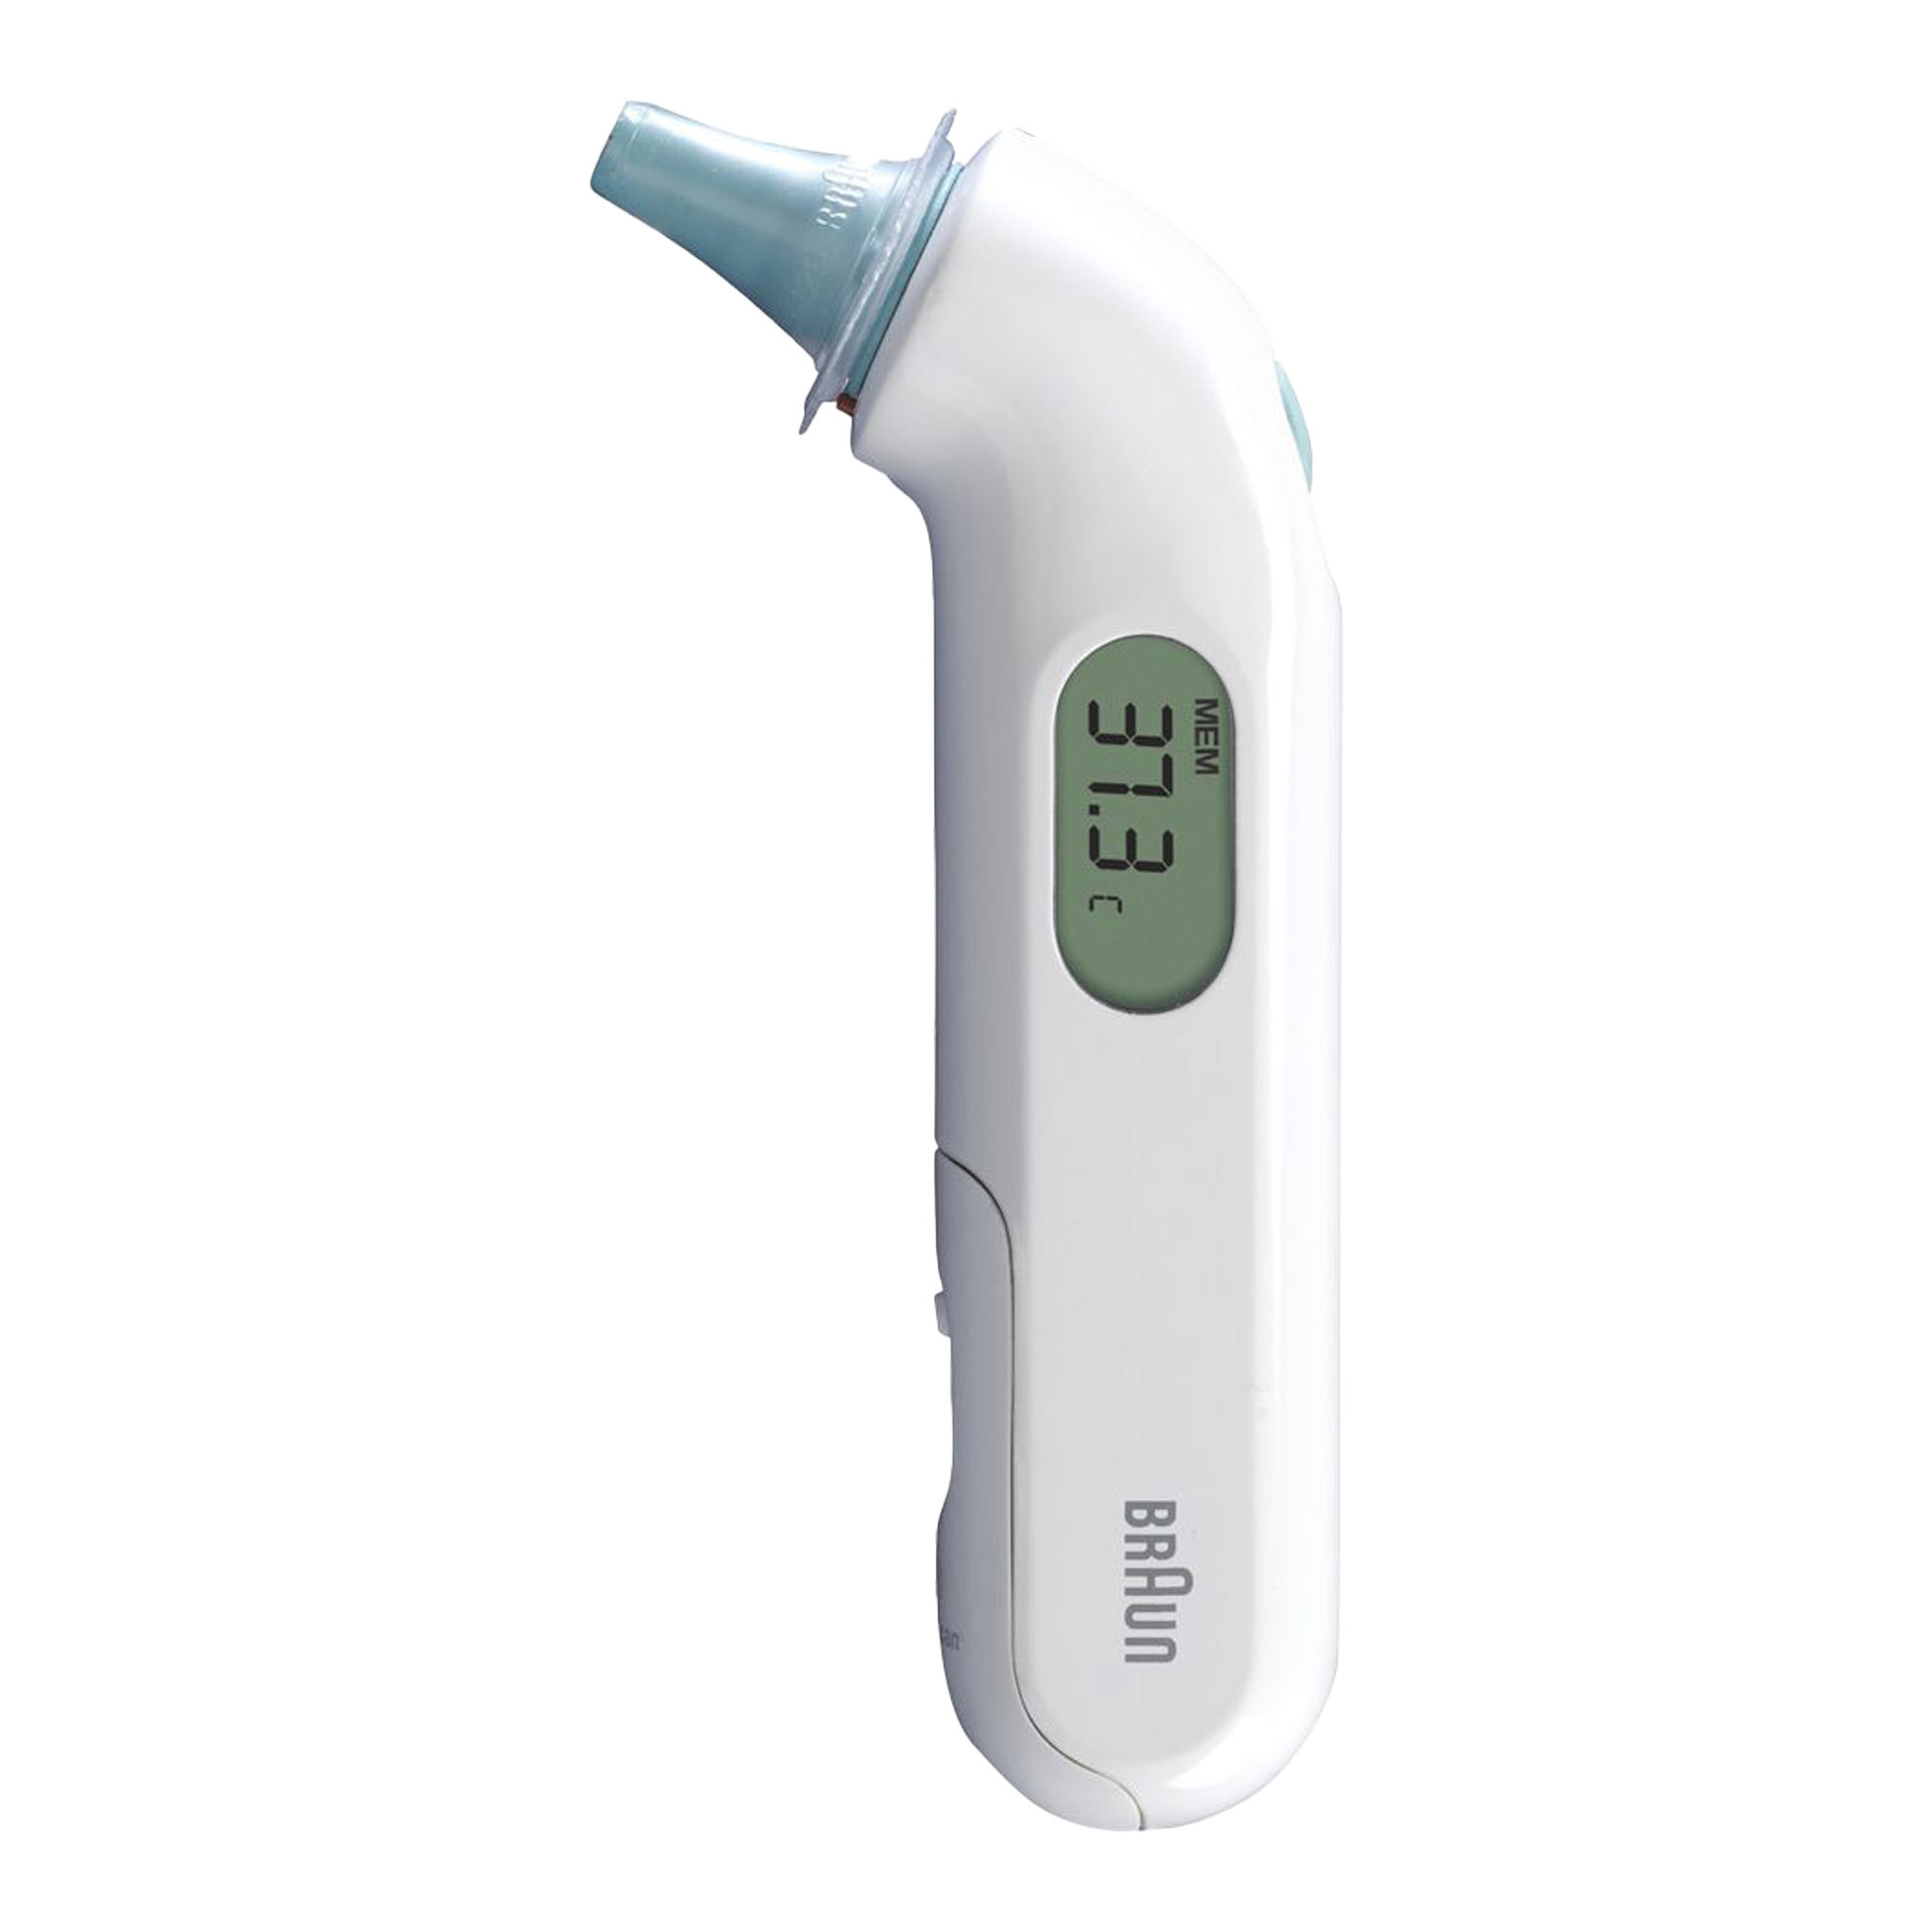 Braun ThermoScan3 Infrarot-Ohrthermometer IRT3030WE 1 St - PZN